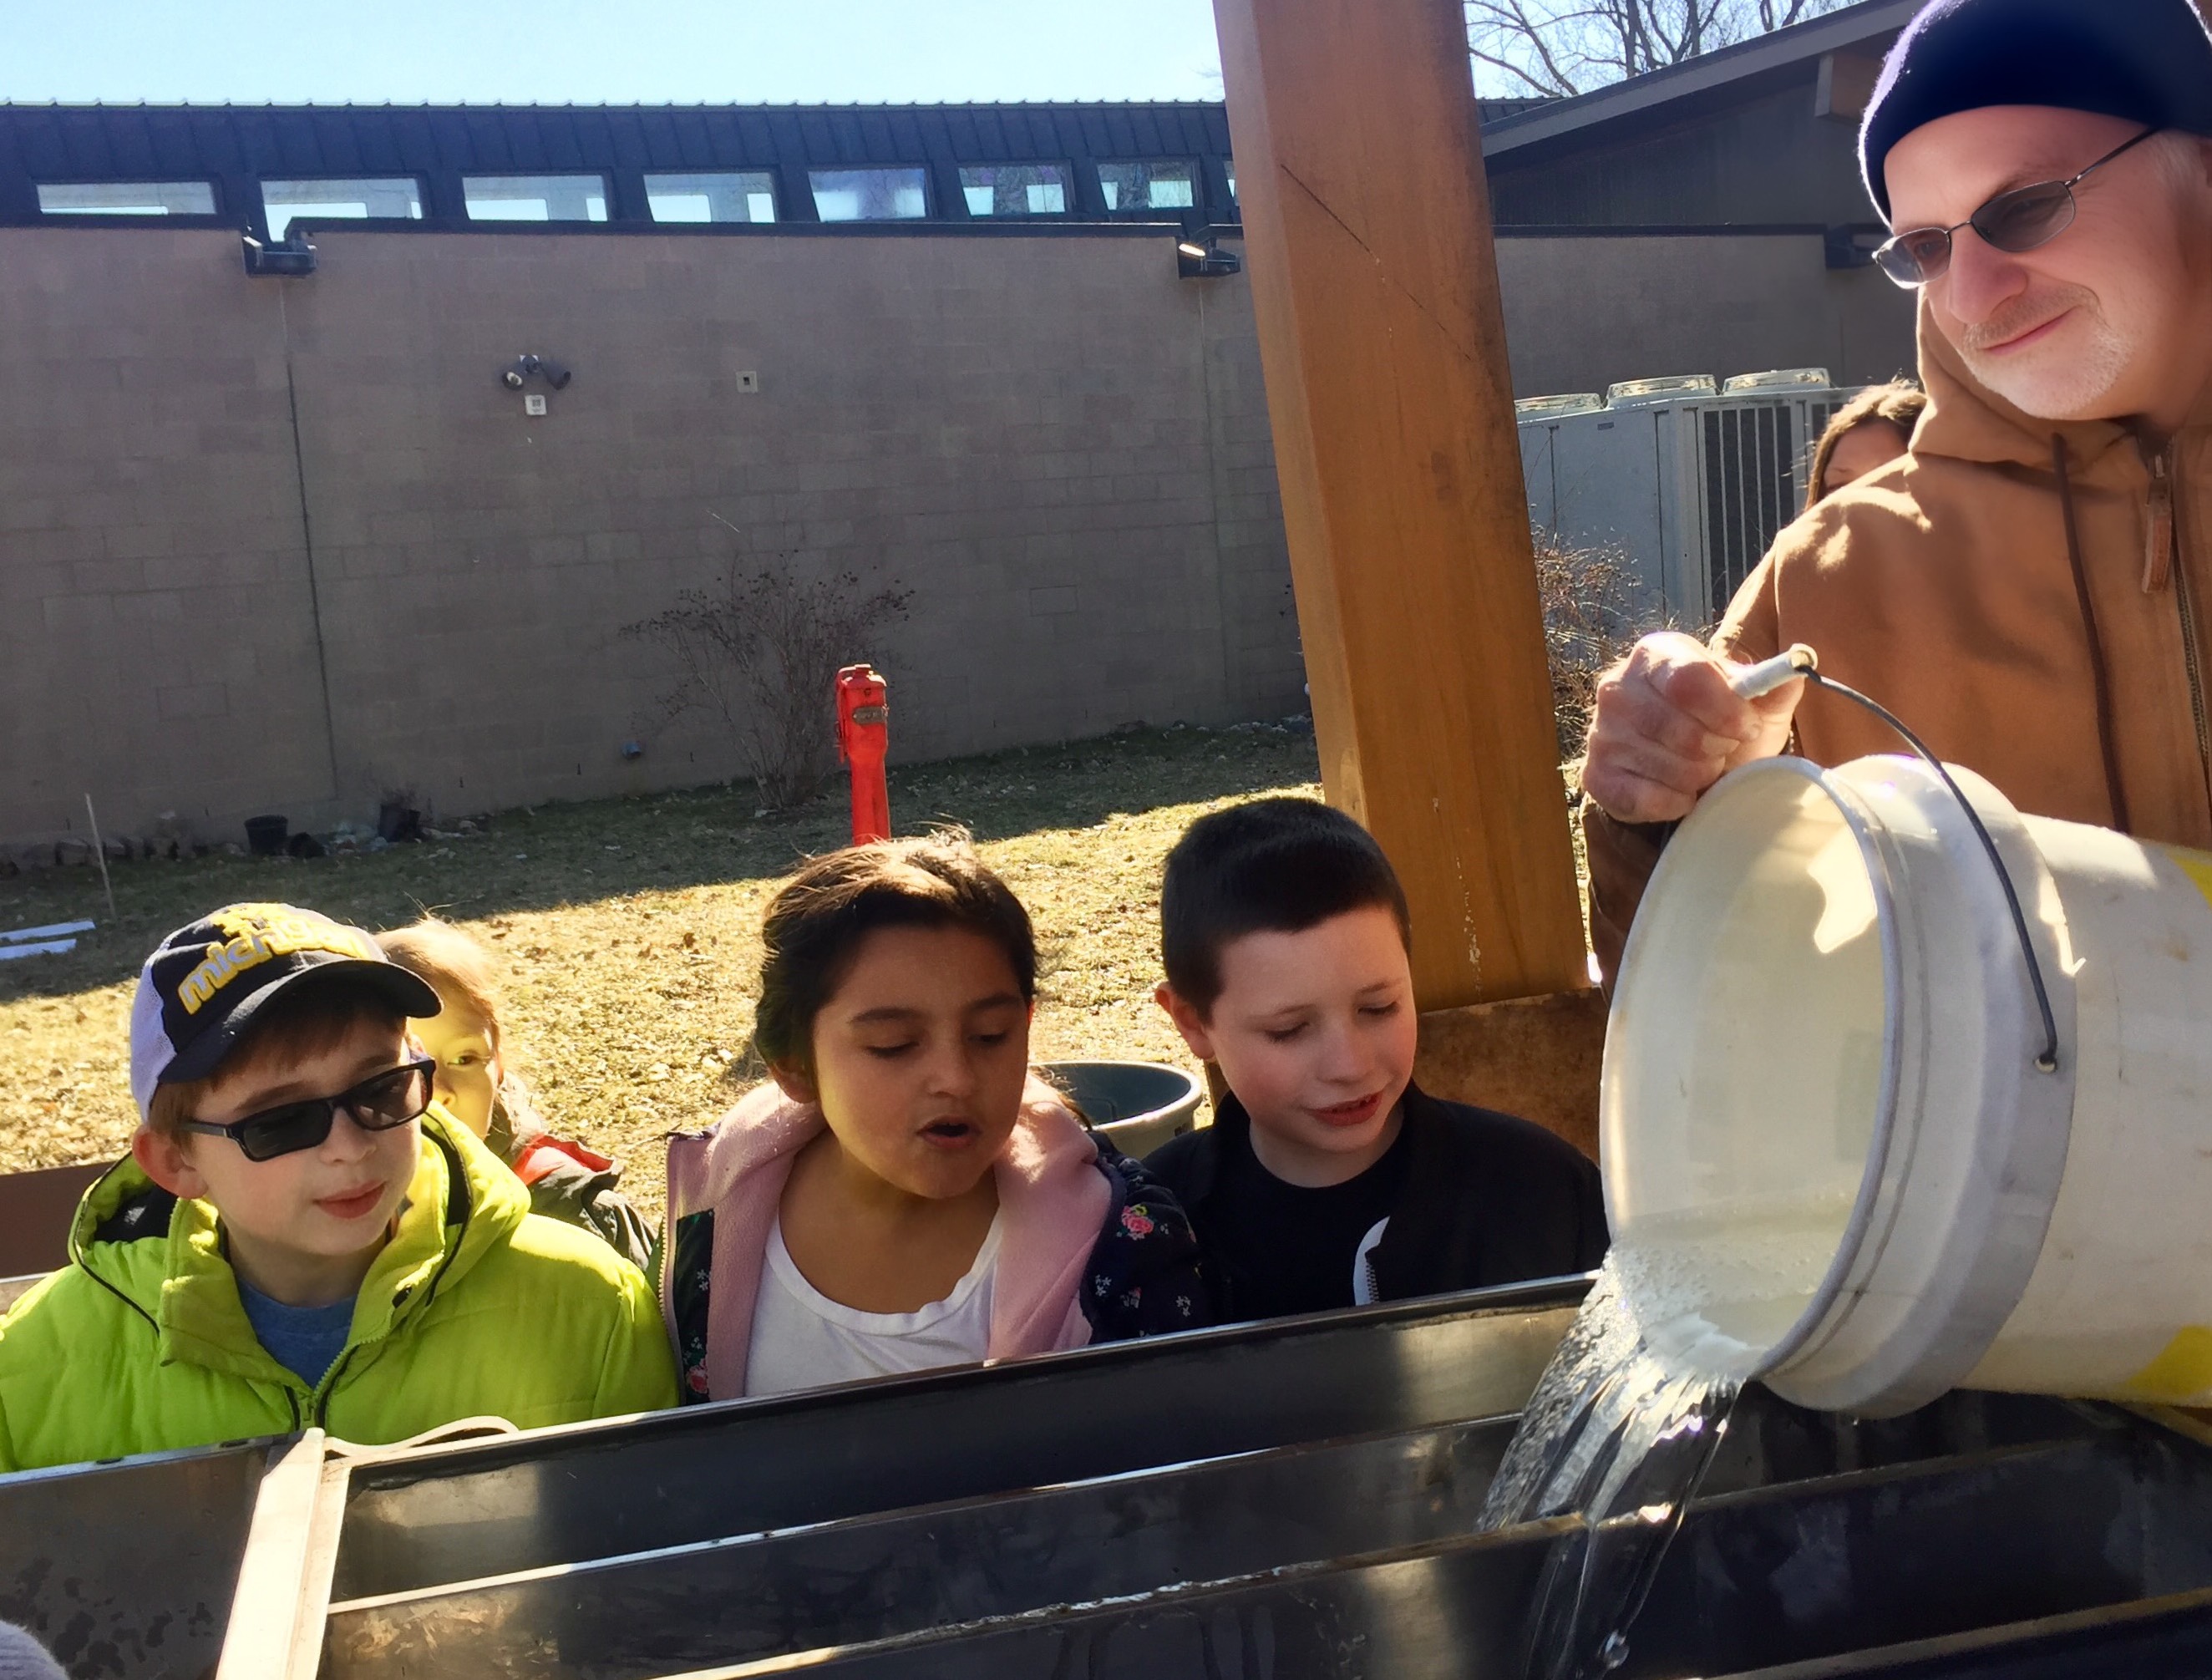 EIC staff member Rick Simek pours sap into the outdoor maple syrup kitchen